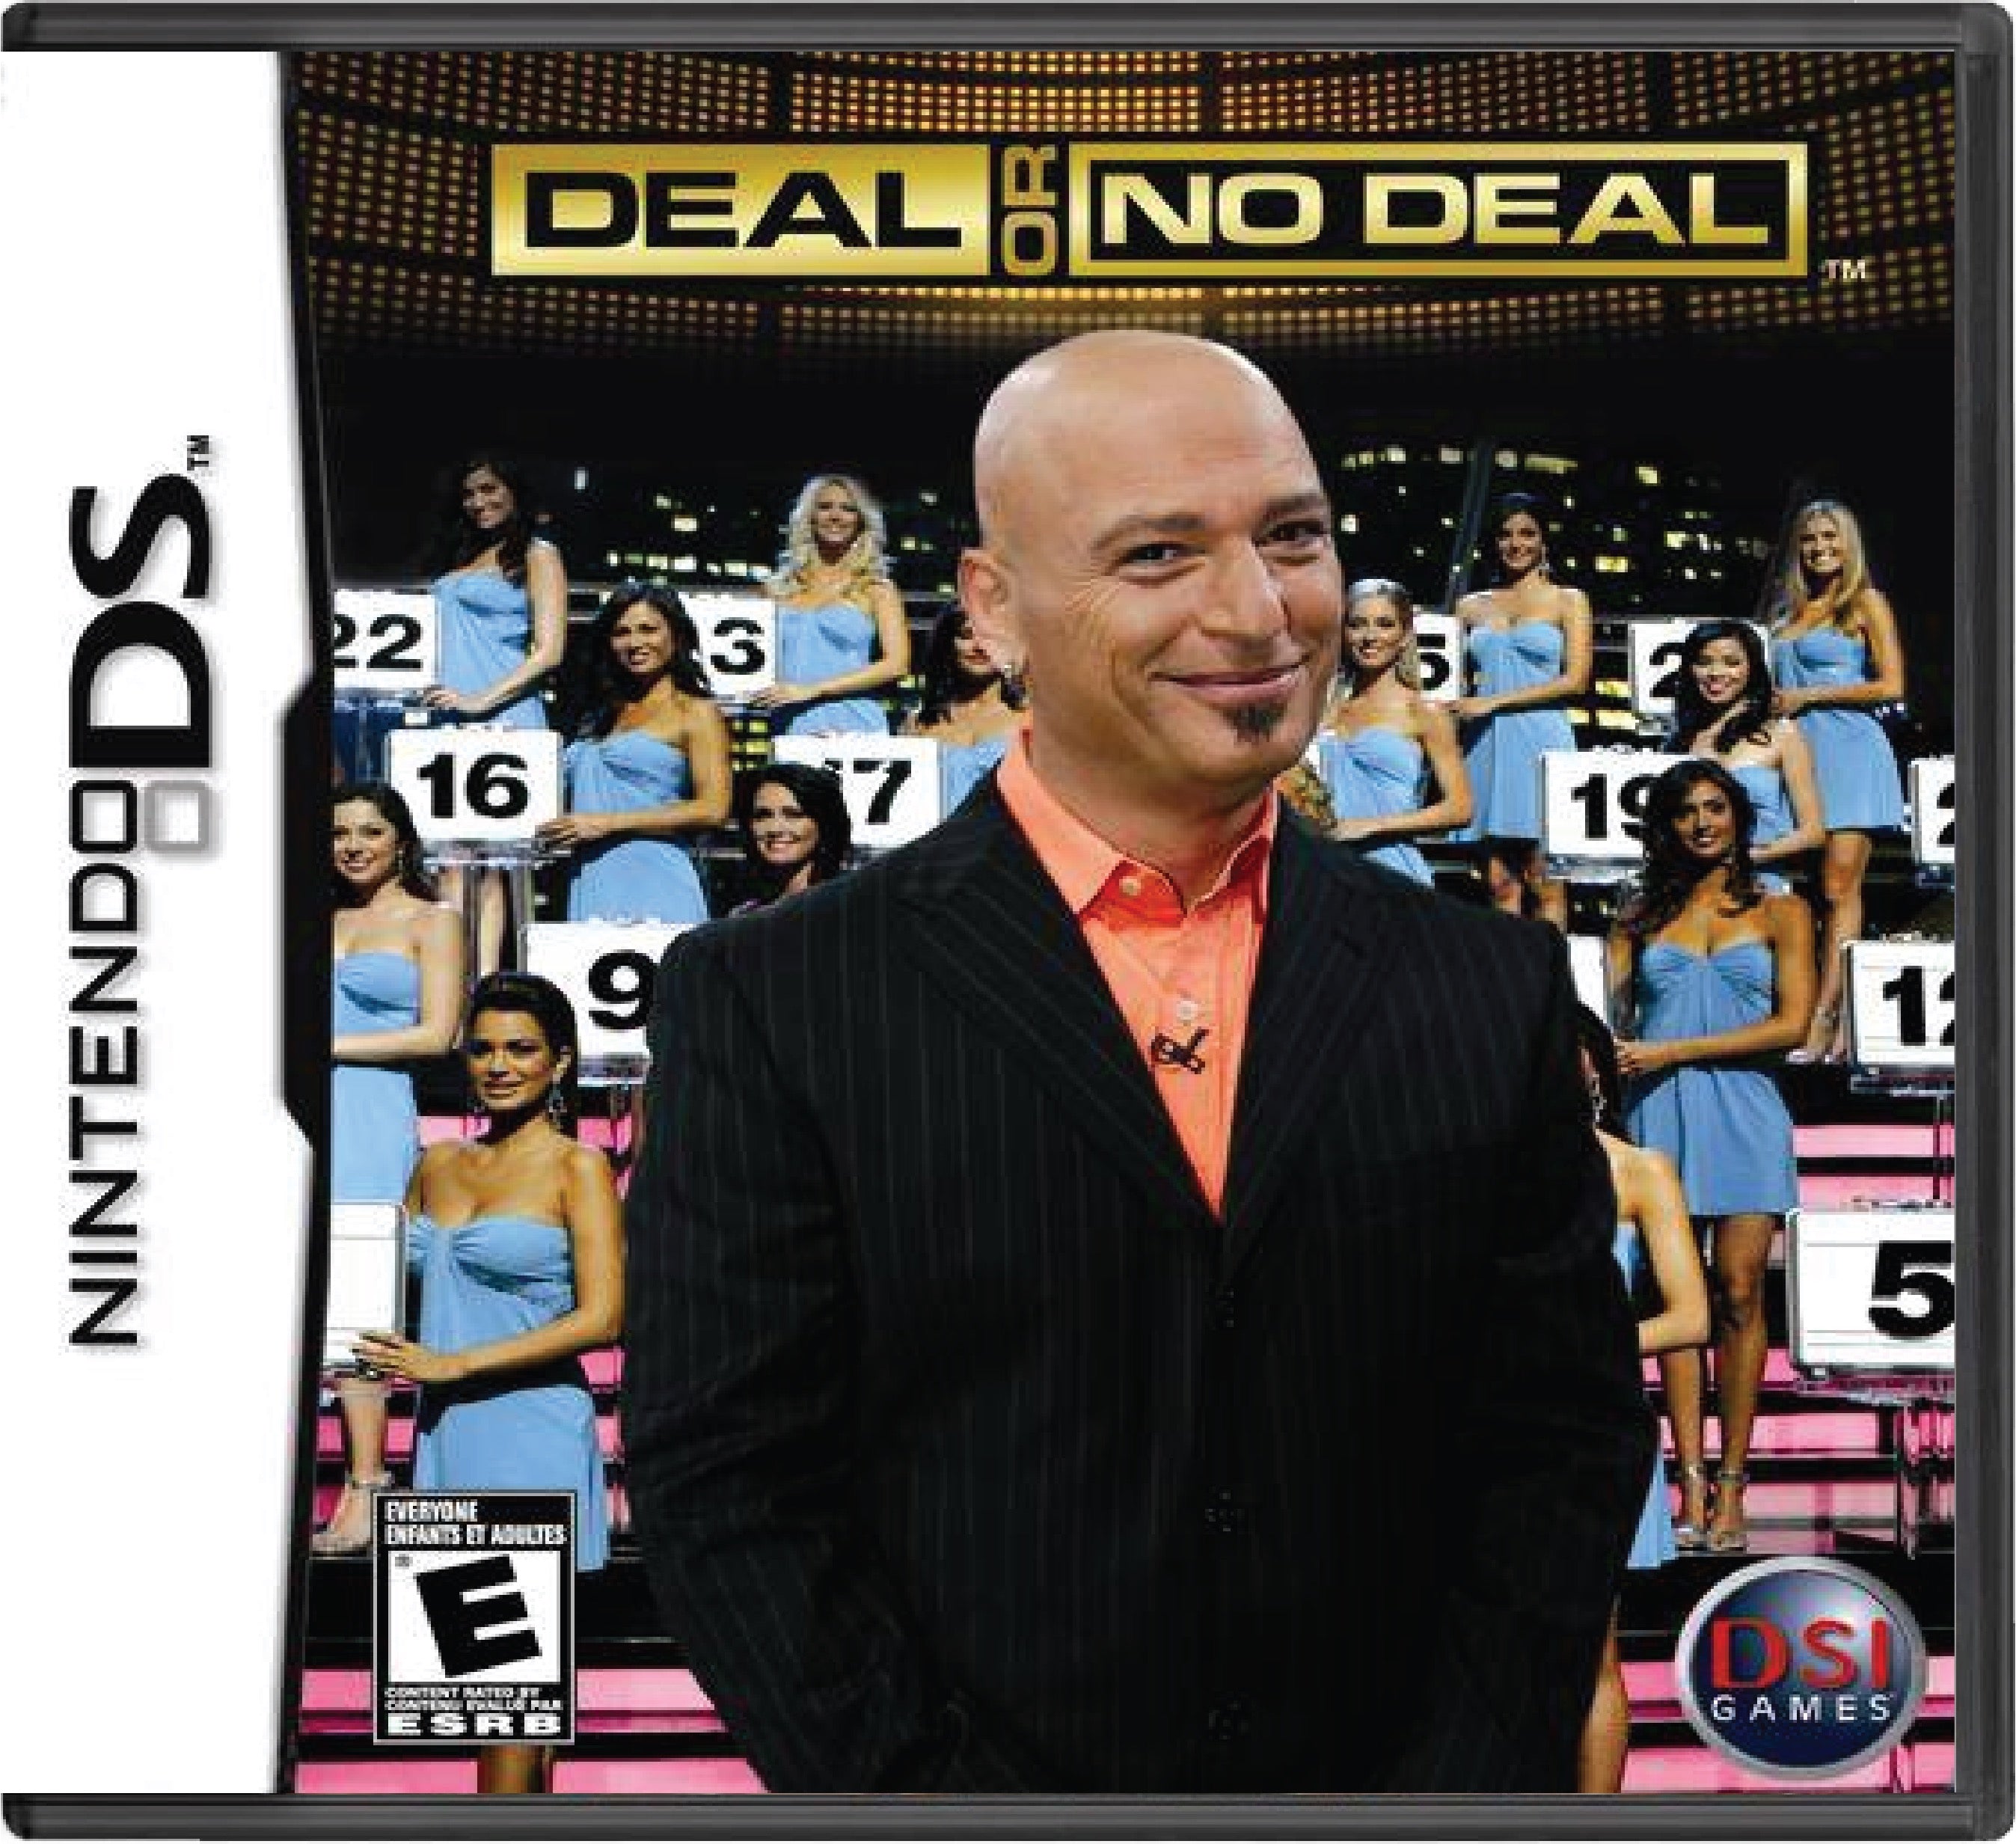 Deal or No Deal Cover Art